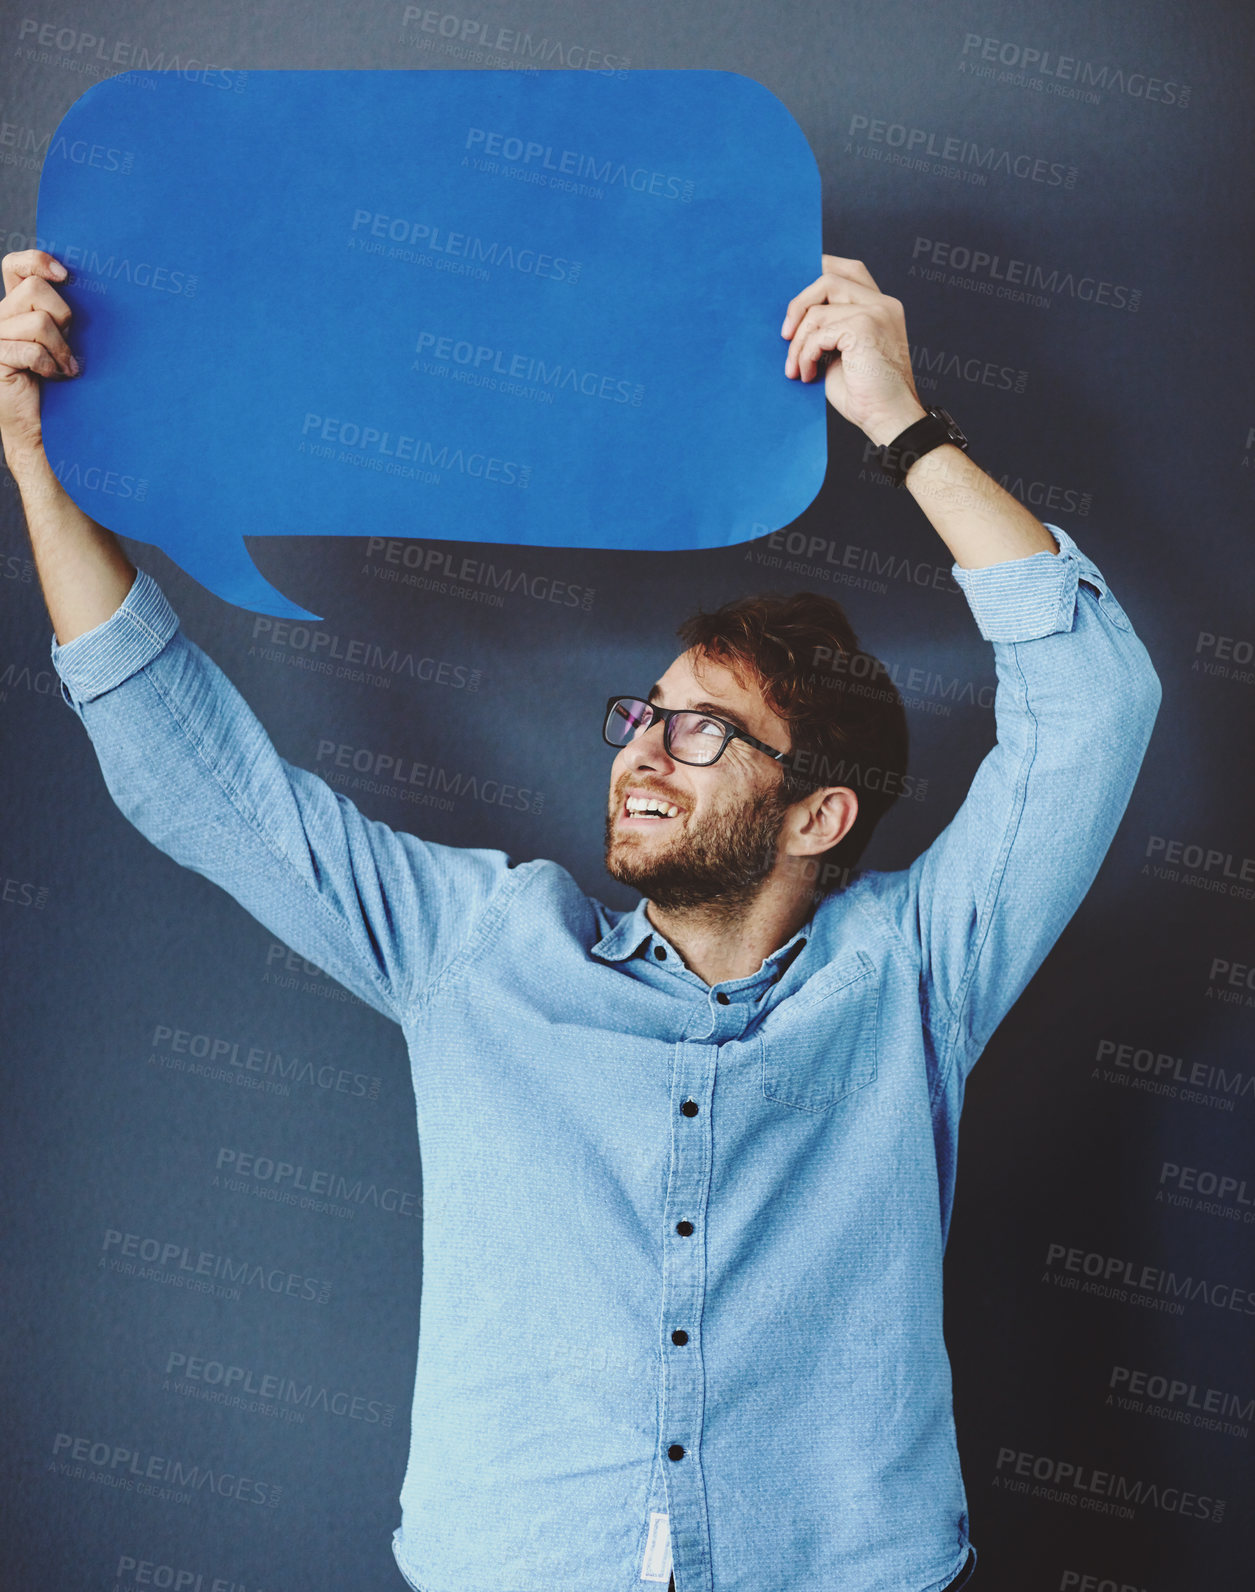 Buy stock photo Studio shot of a young man holding a speech bubble against a grey background